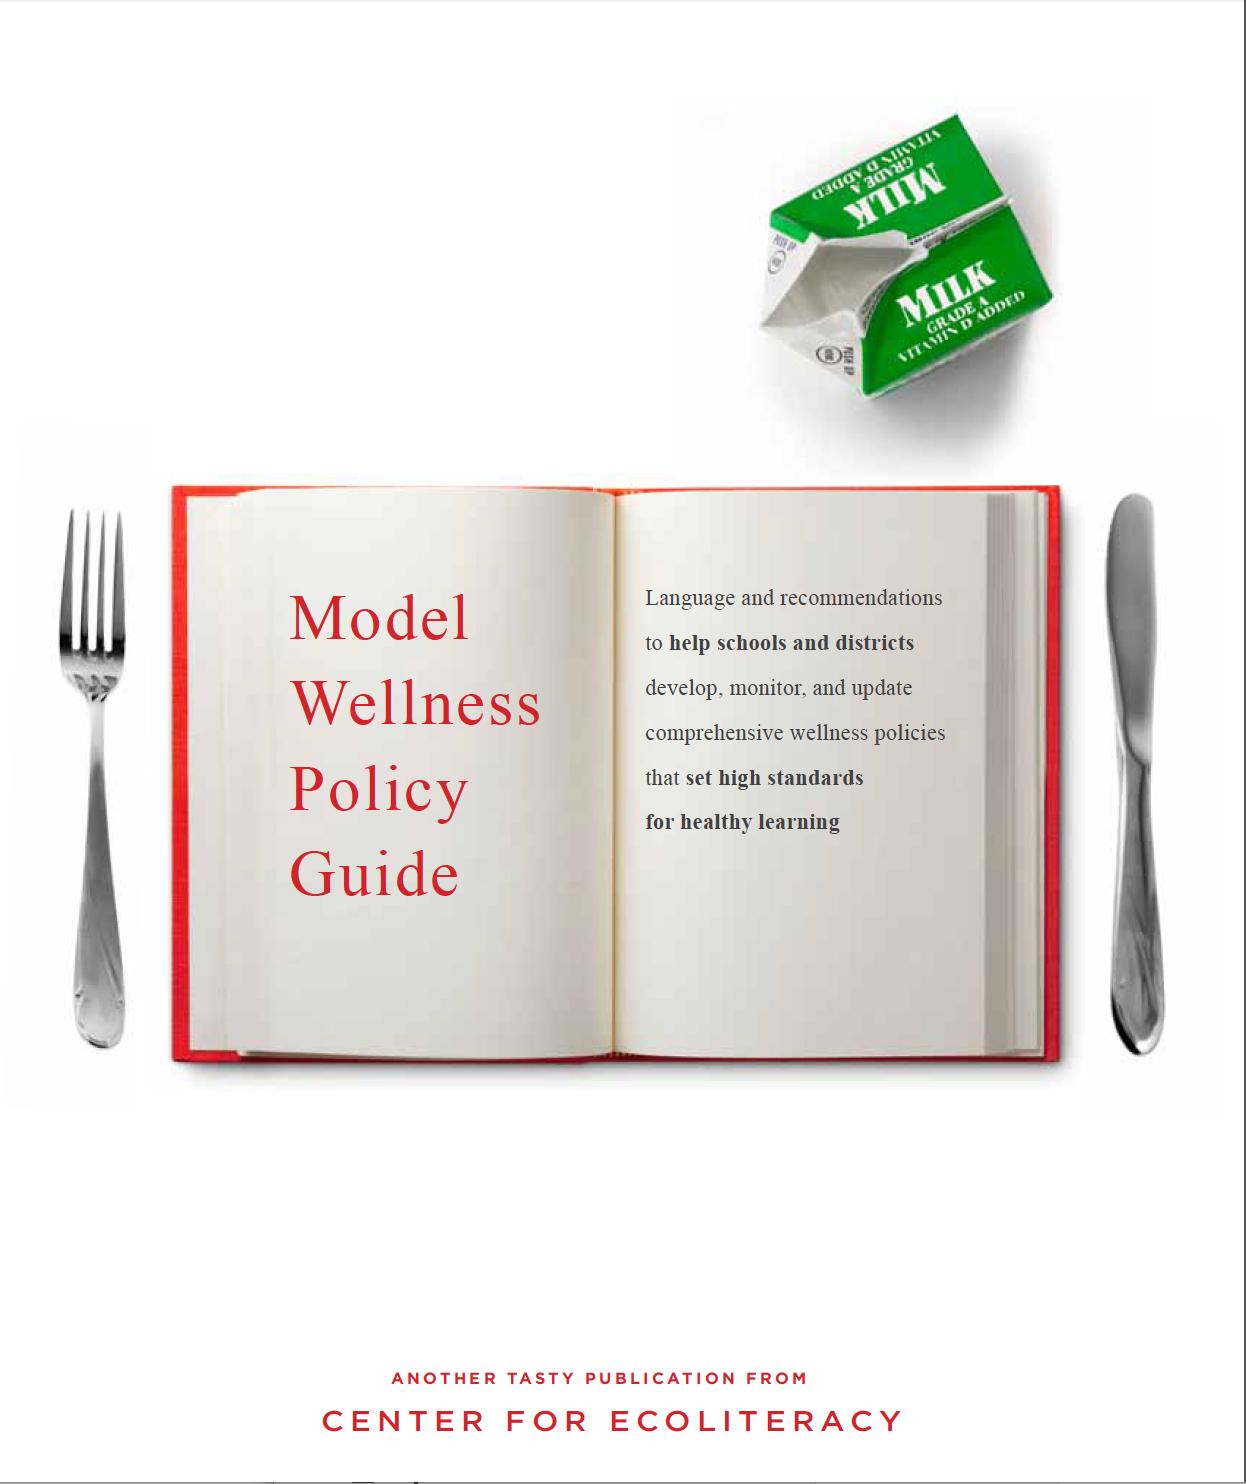 Model Wellness Policy Guide